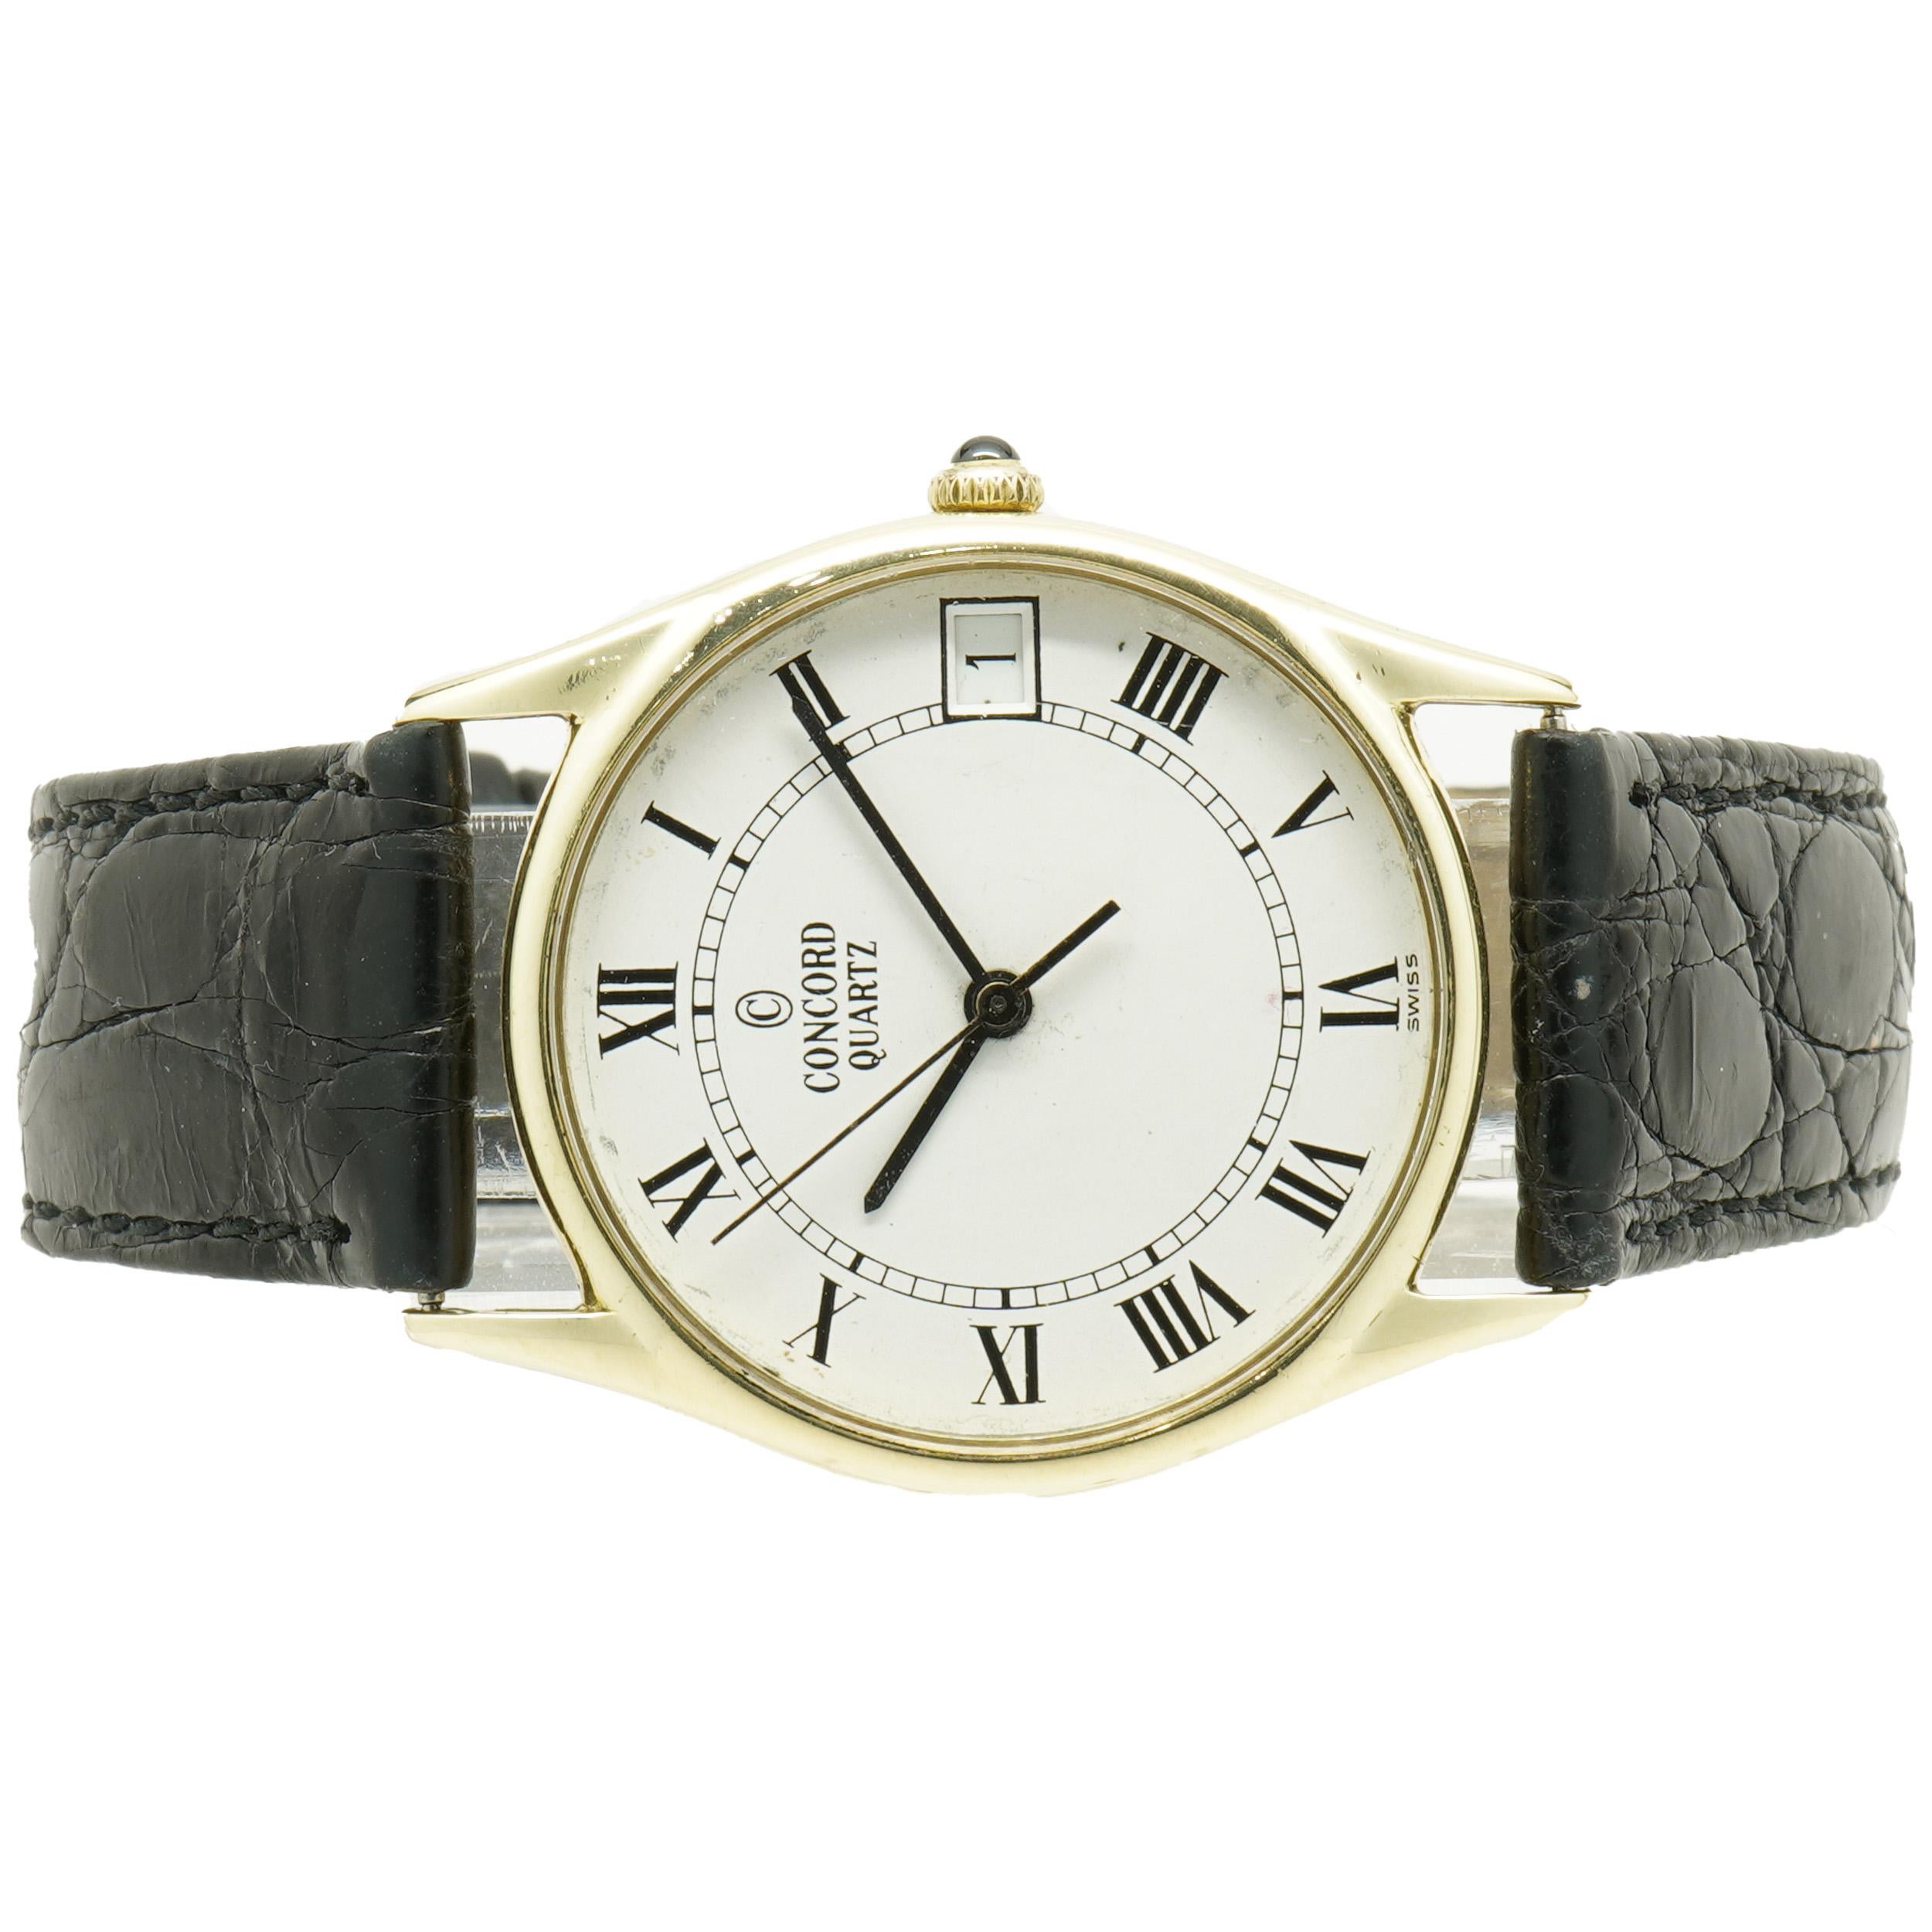 Movement: quartz
Function: hours, minutes, seconds, date
Case: 32.2mm round case, sapphire crystal, pull/push crown
Dial: white with roman hour markers
Band: black leather
Reference: 2095210
Serial#: 384XXX

No Box or Papers
Guaranteed to be